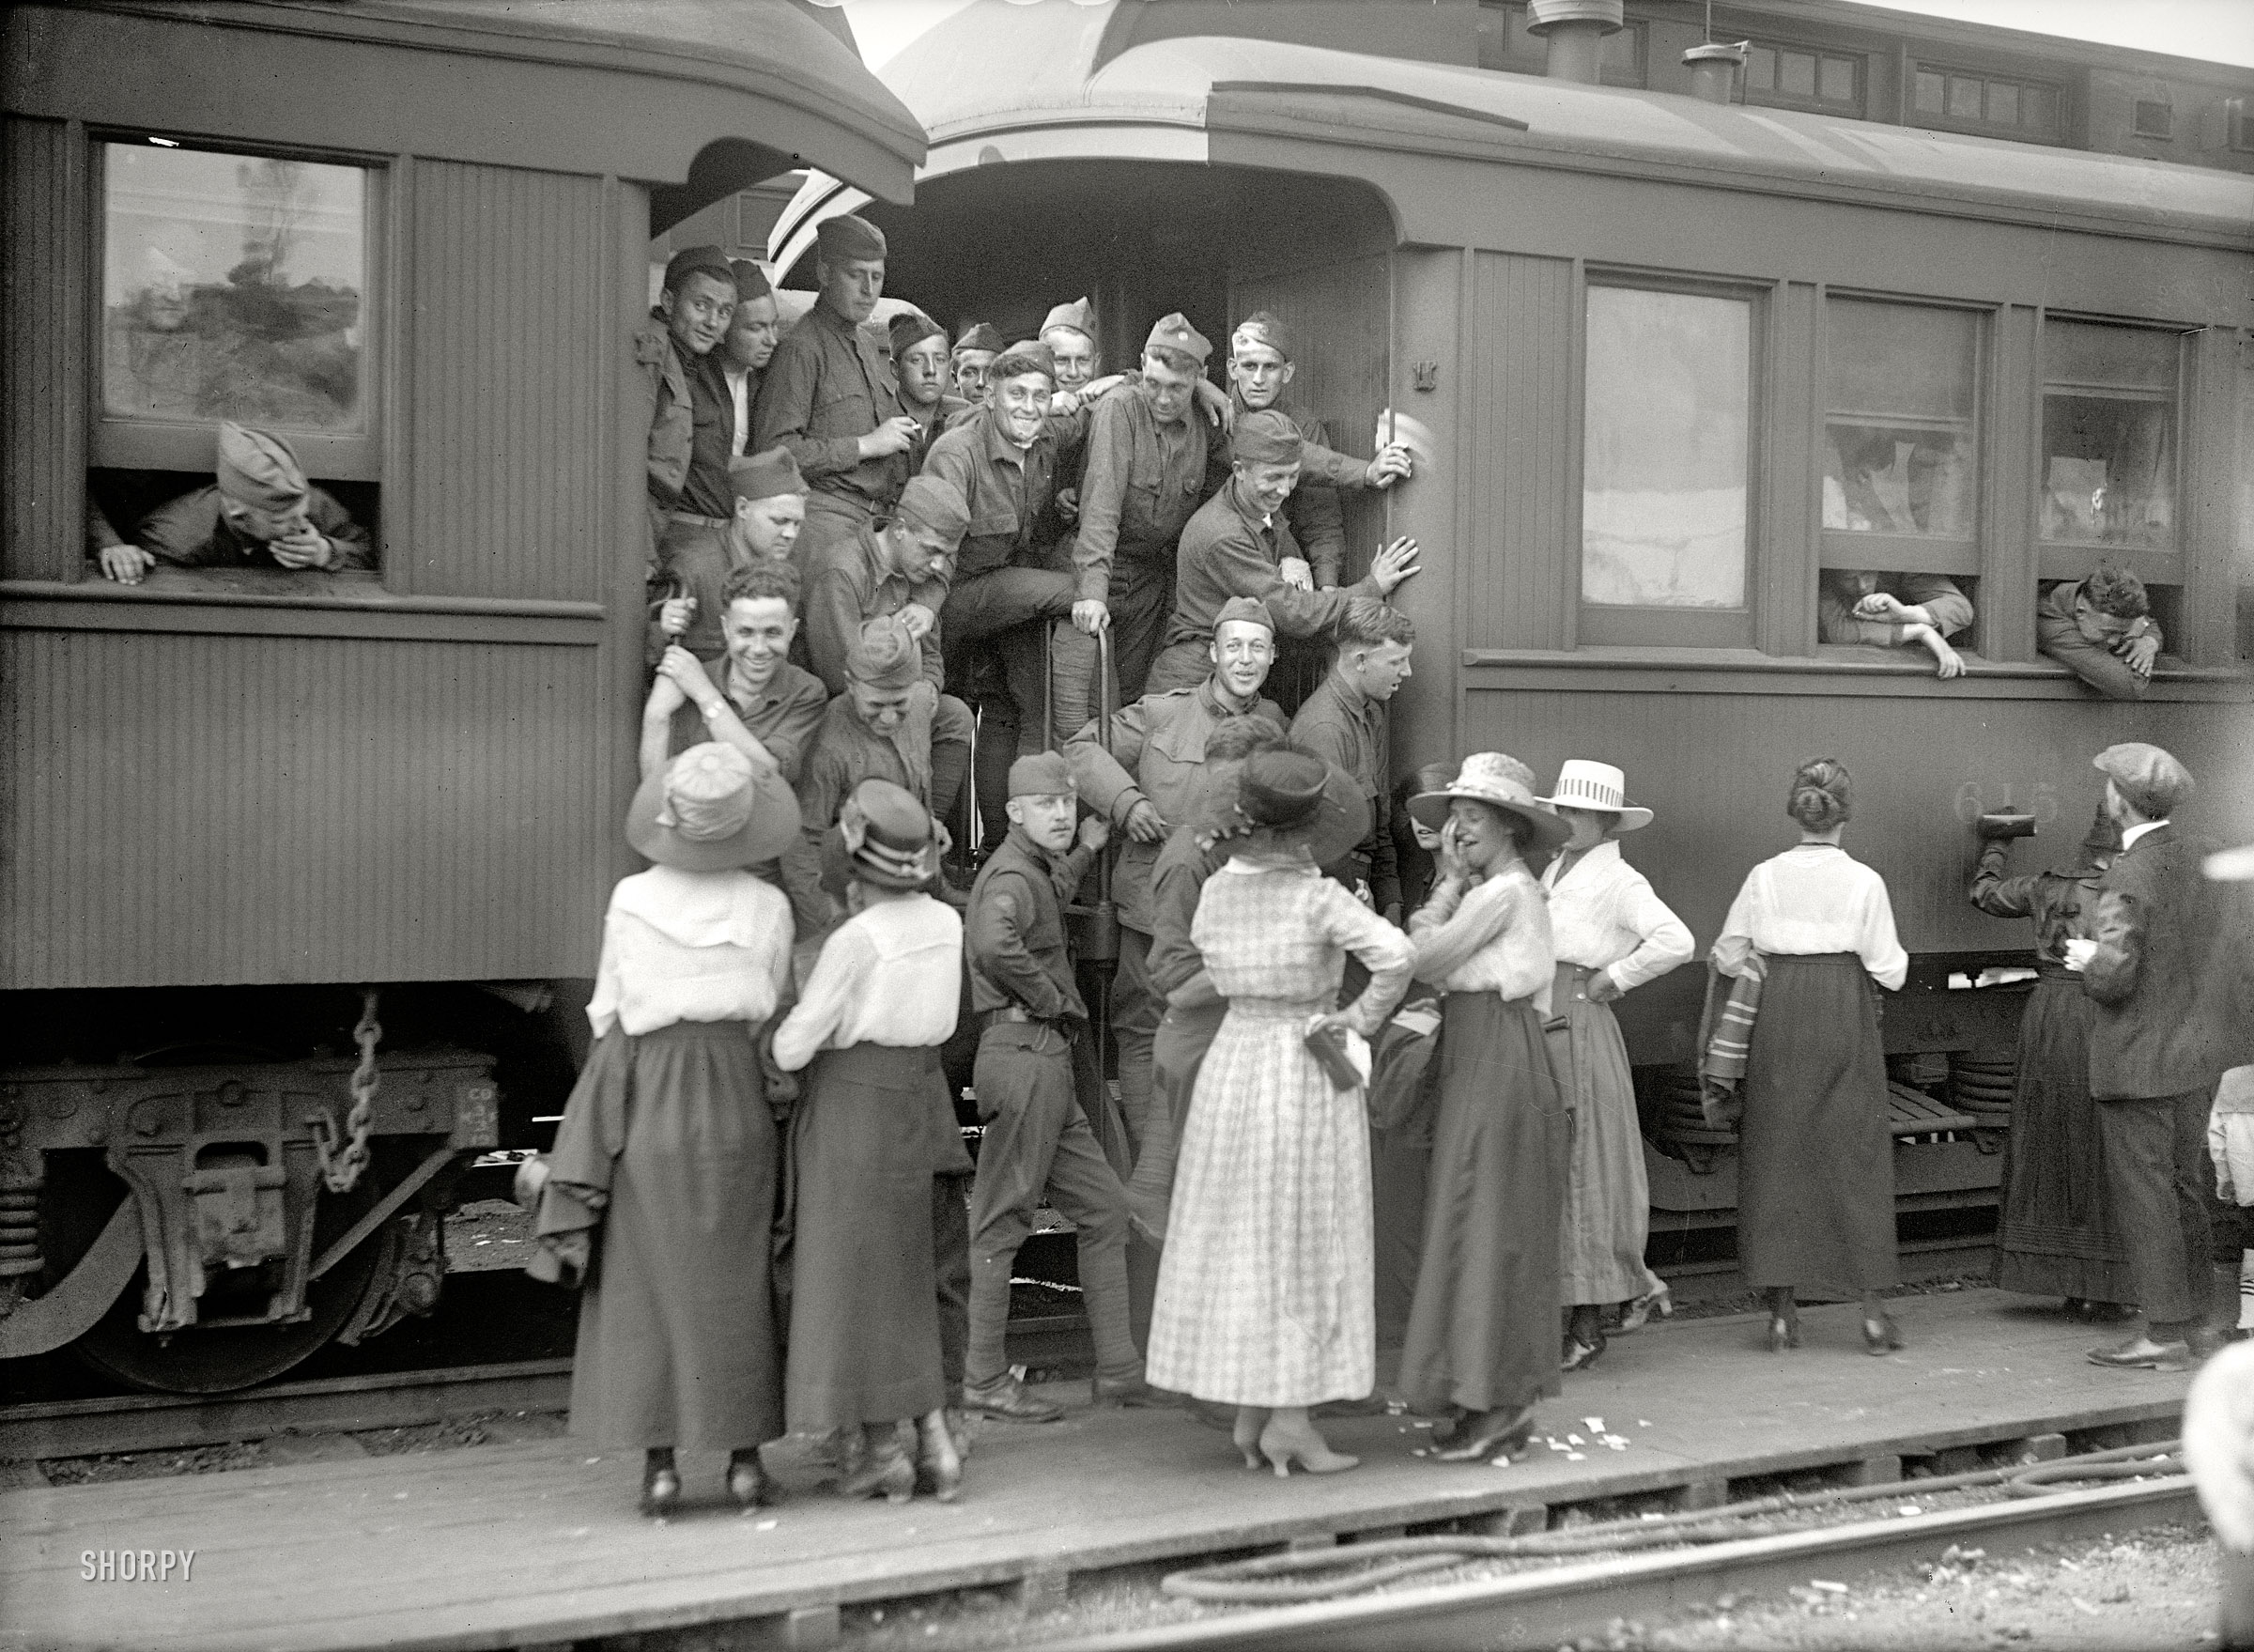 1919. "U.S. Army -- return of soldiers to Washington, D.C." Harris & Ewing Collection glass negative. View full size.